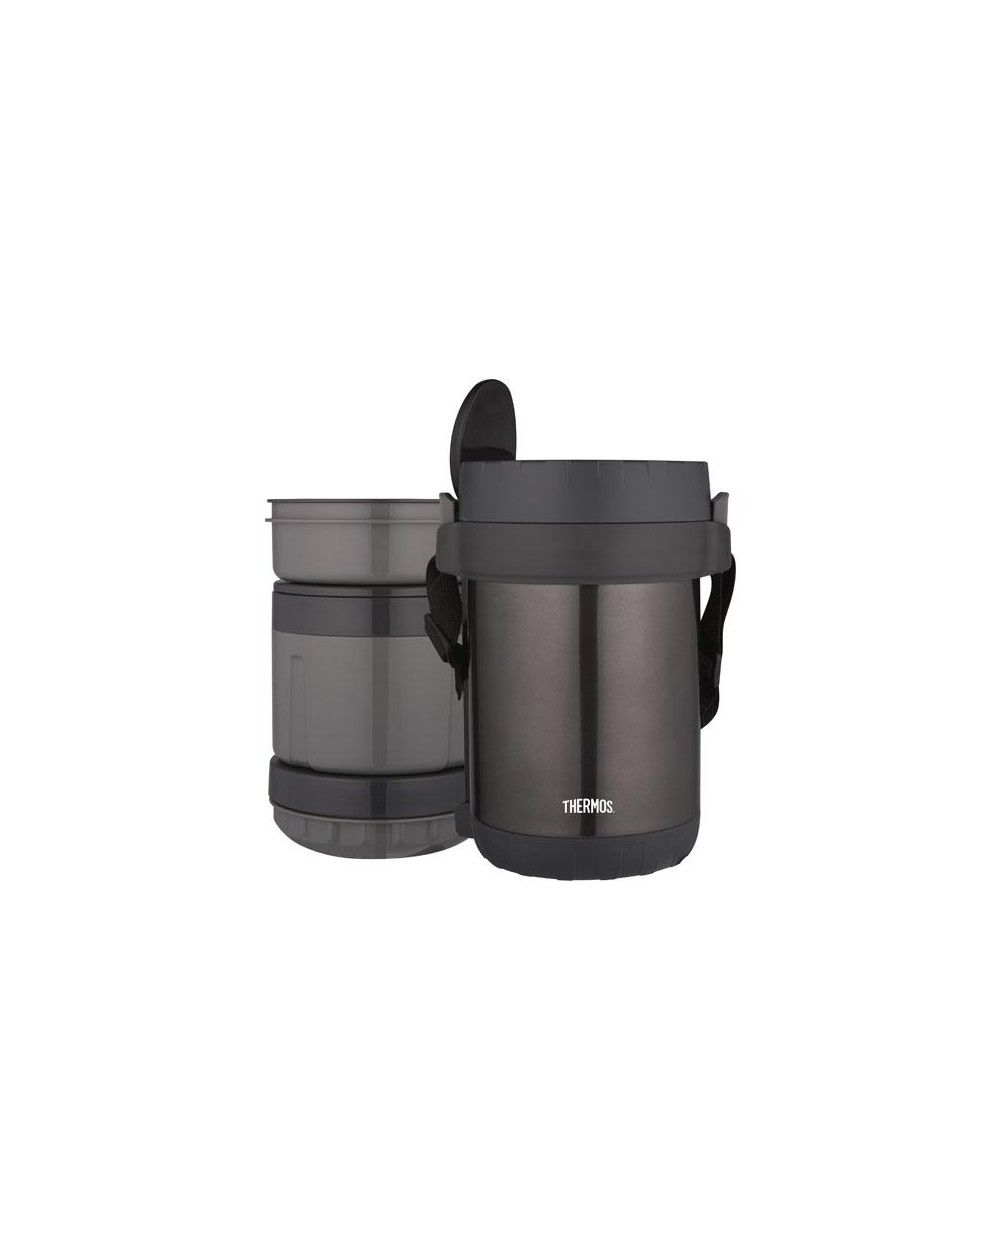 Boite alimentaire THERMOS isotherme avec 3 compartiments